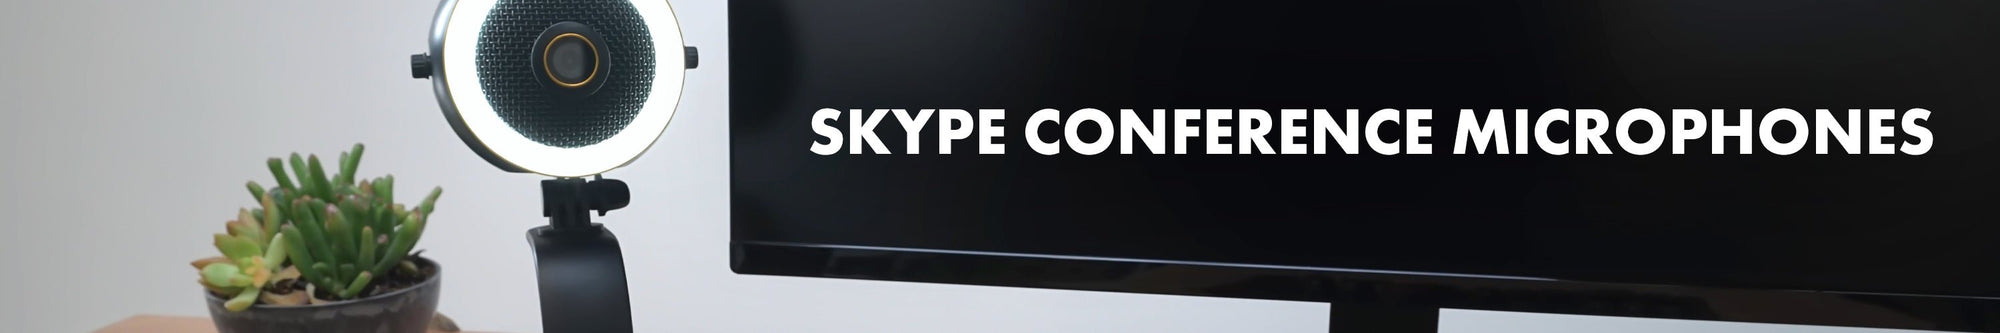 Skype Conference Microphones